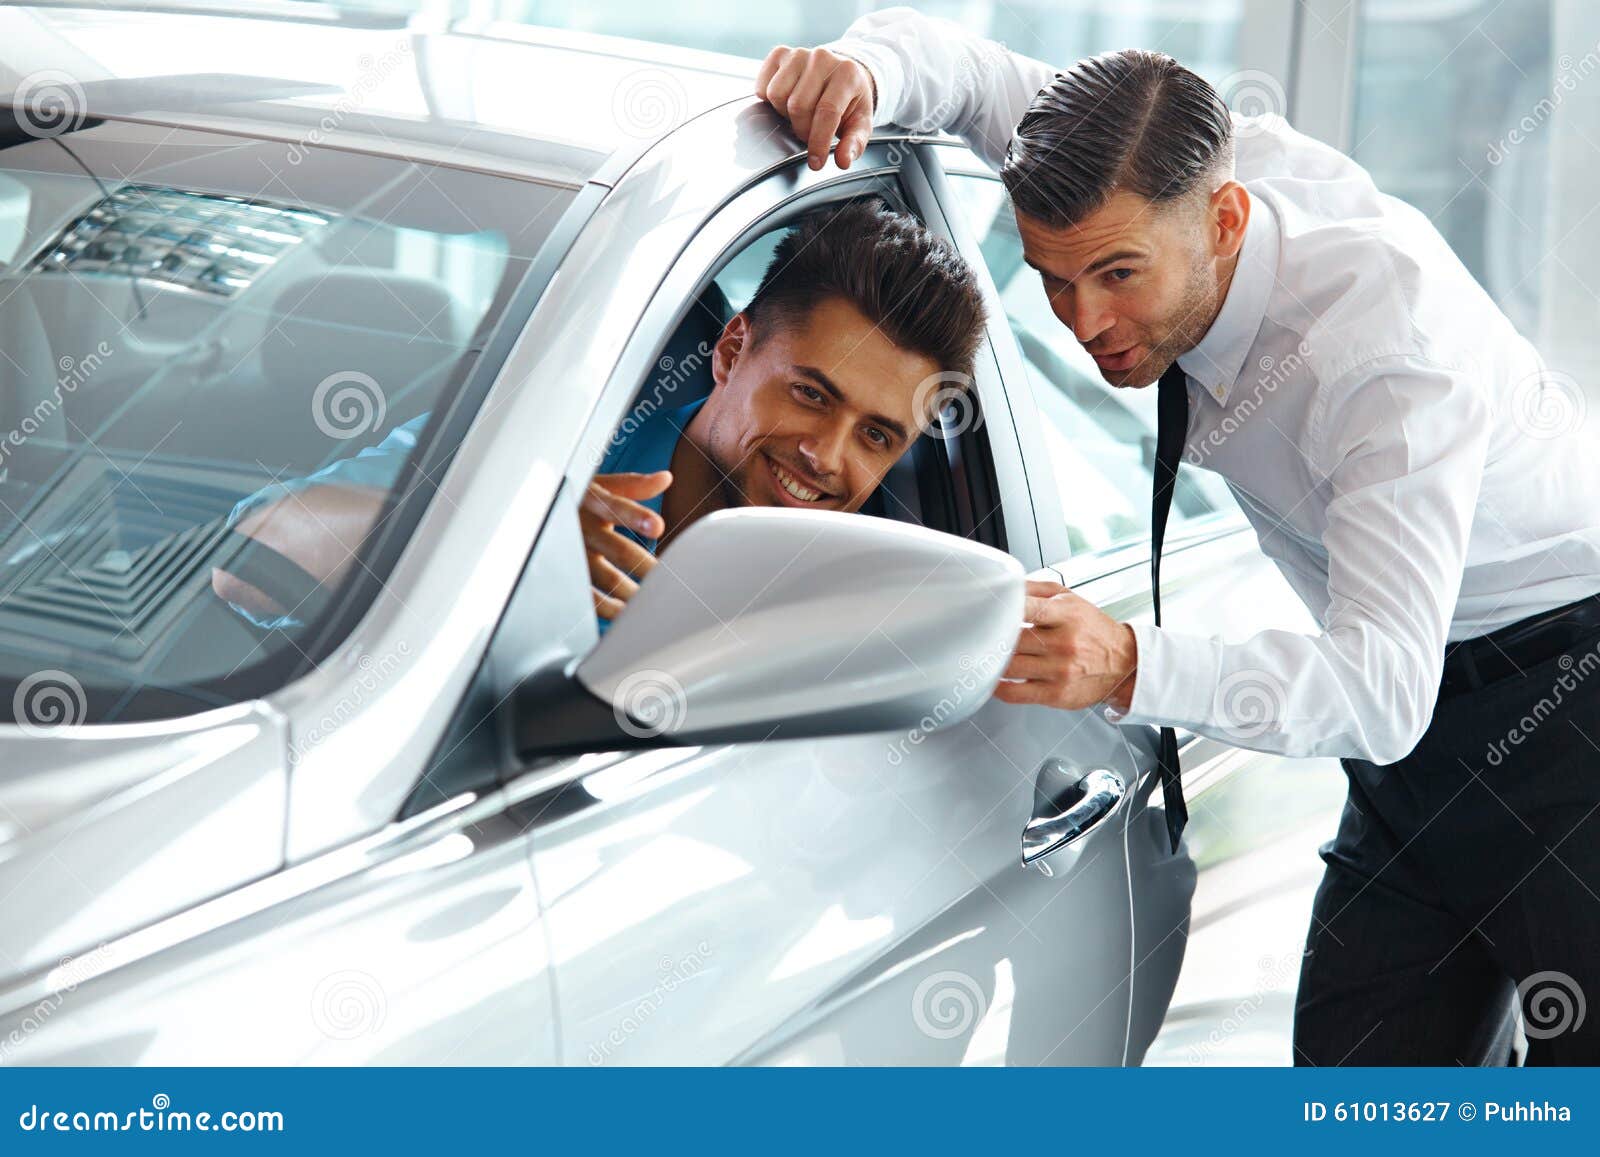 car sales consultant showing a new car to a potential buyer in s